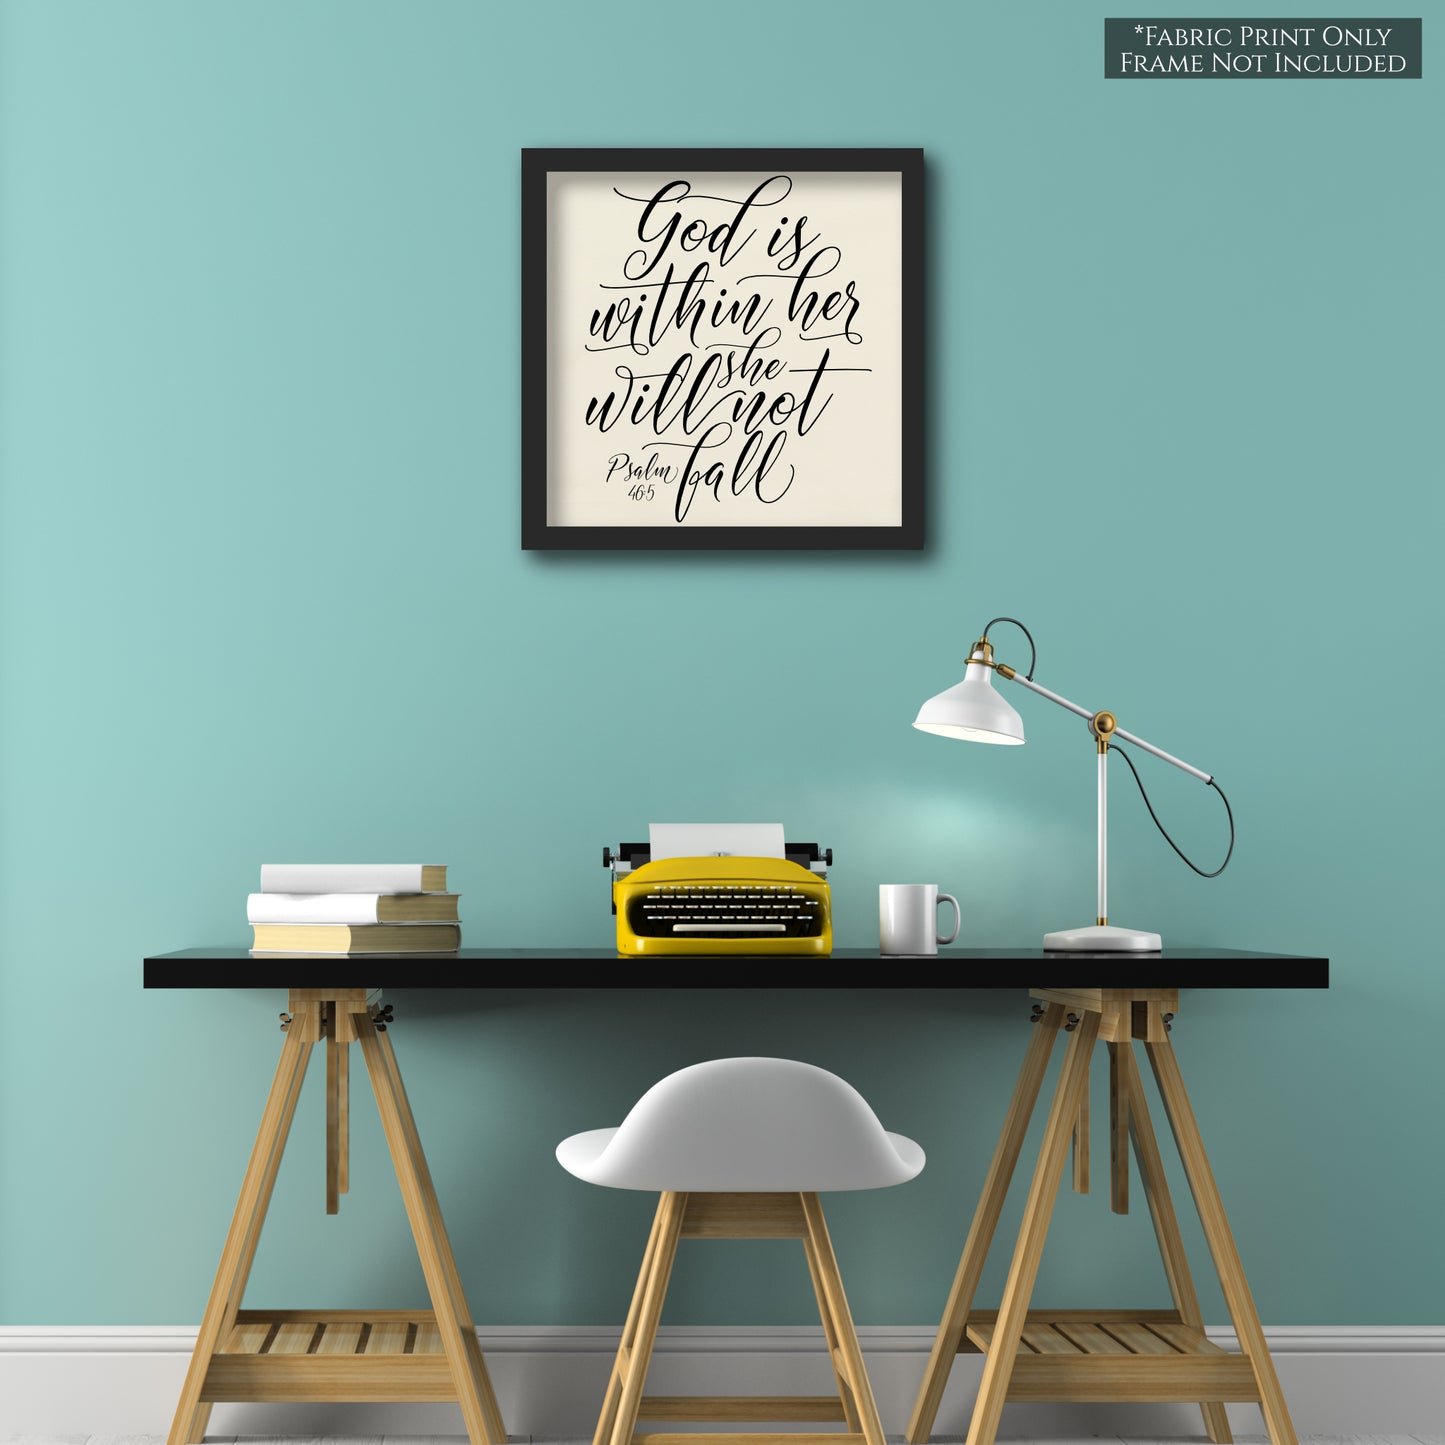 God is within her she will not fall - Psalm 46 5 - Fabric Panel Print, Scripture Fabric, Bible Verse Wall Art